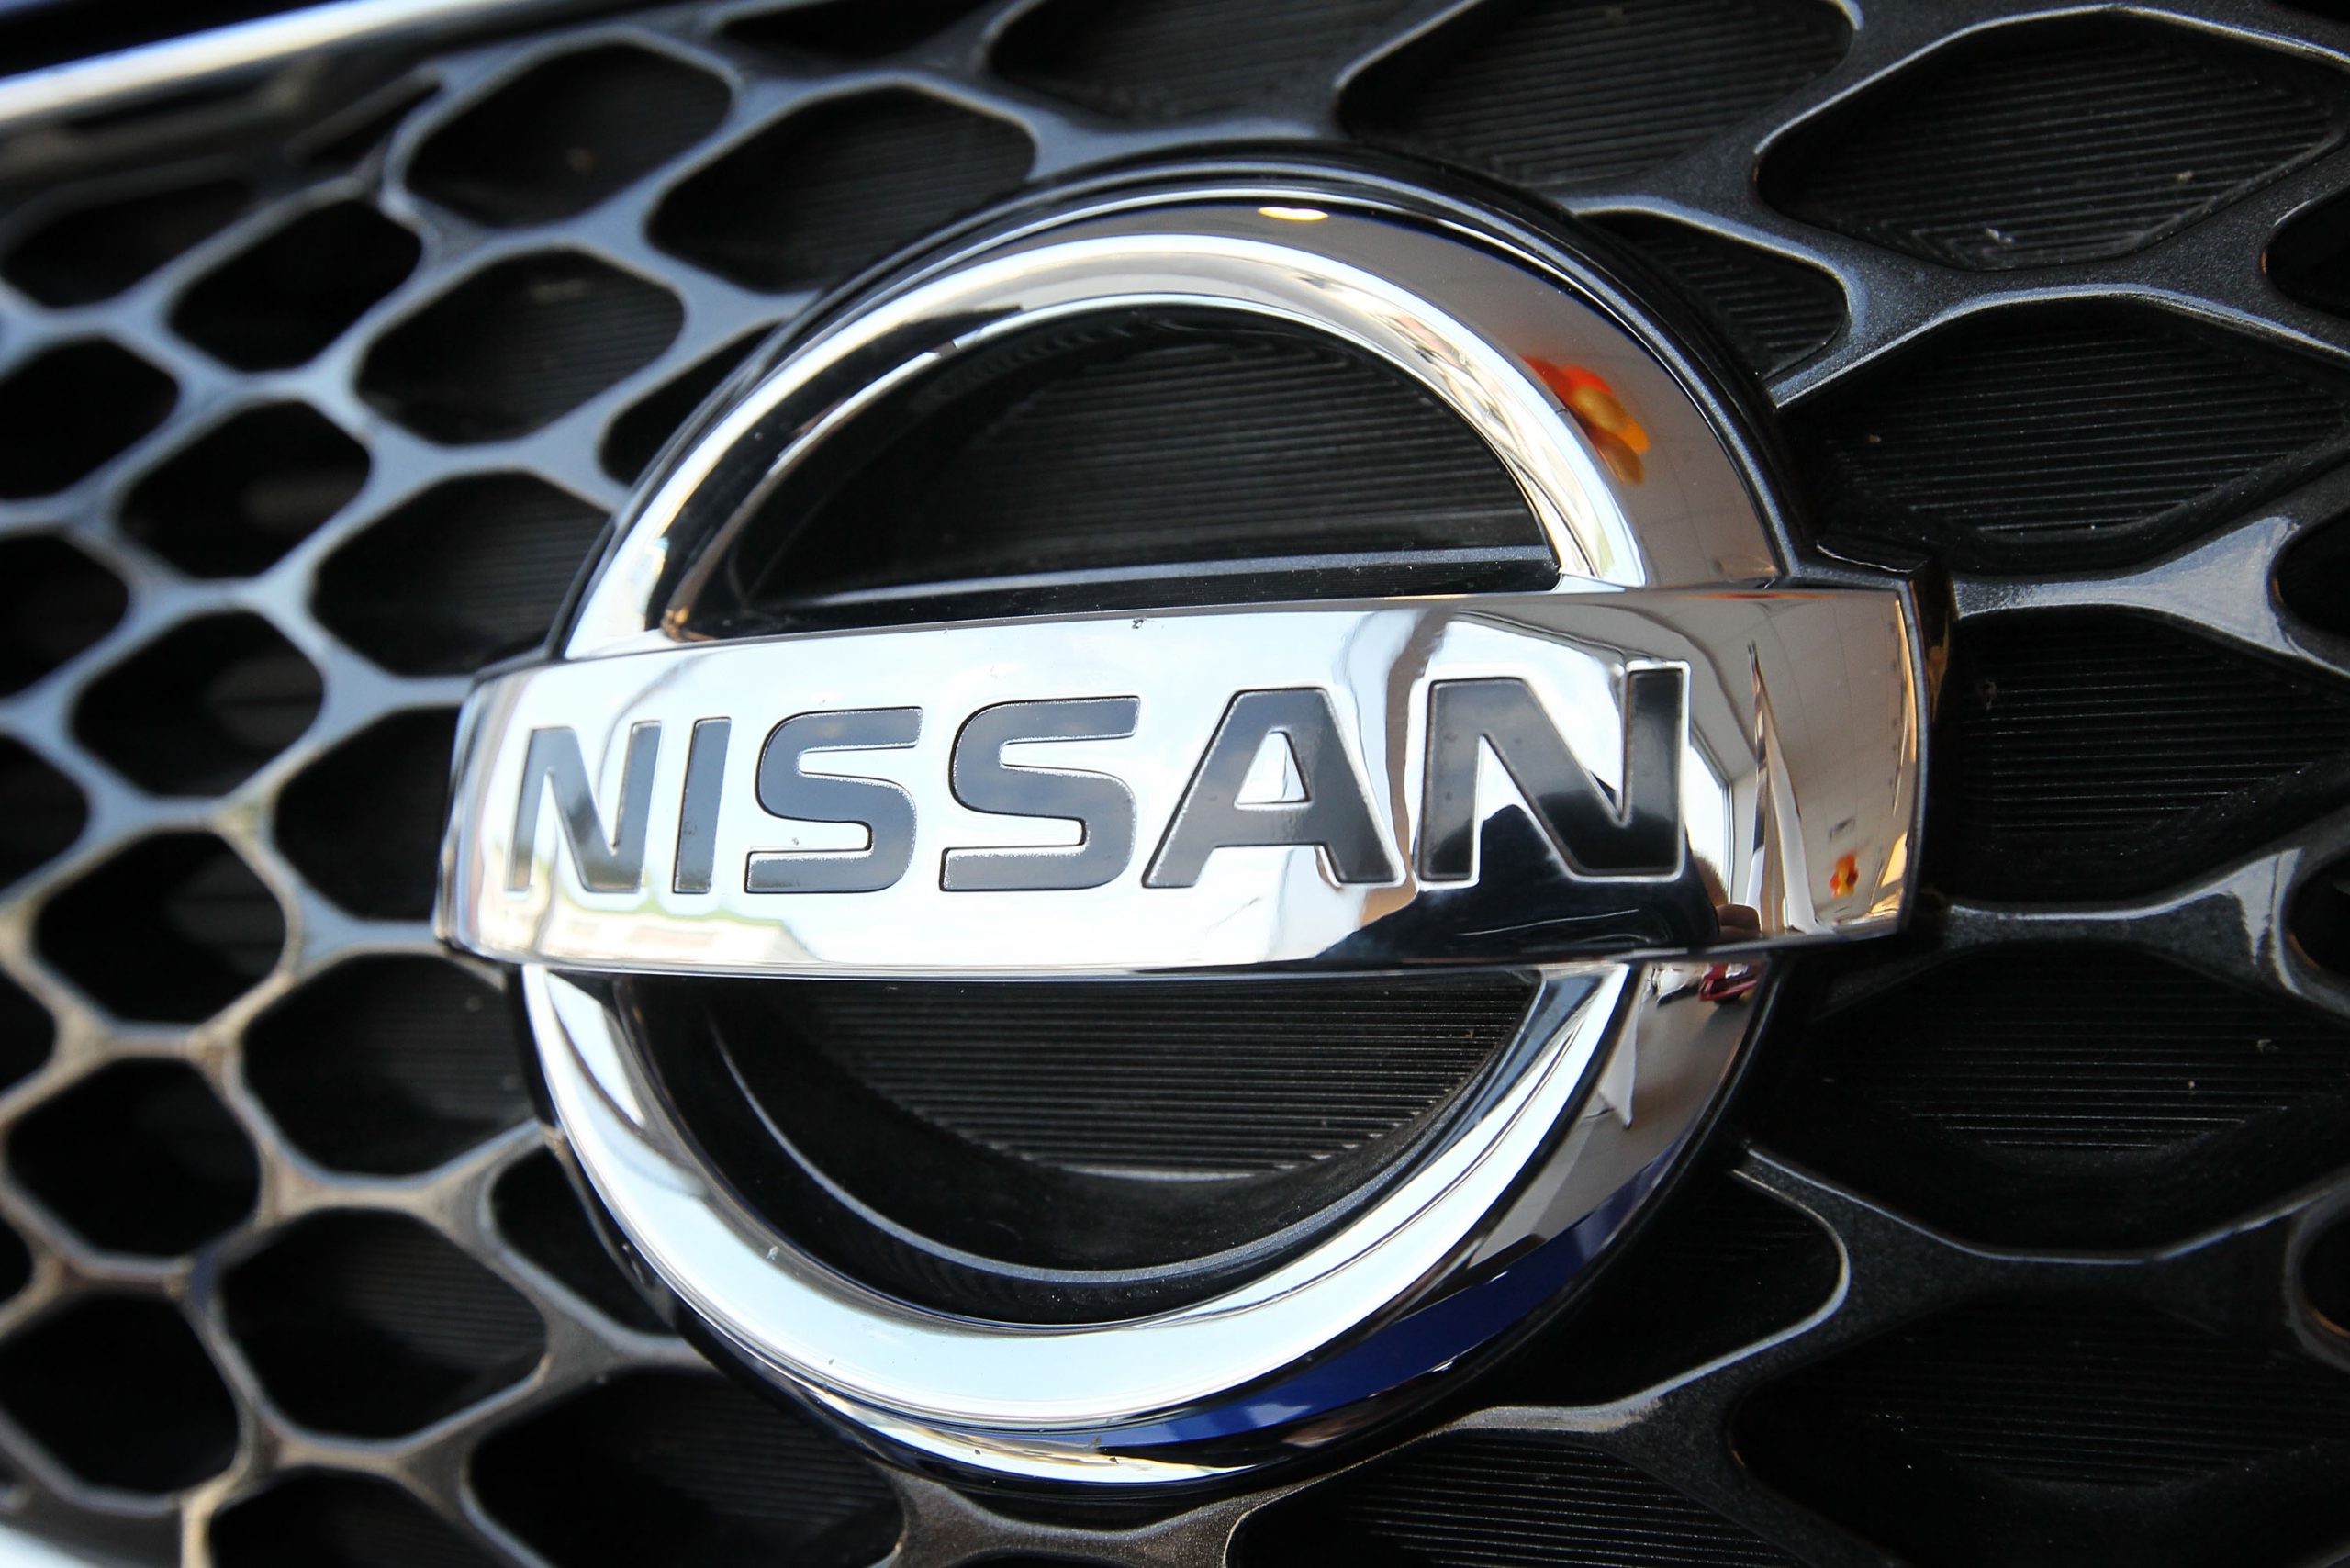 A Nissan Sentra sits on the showroom floor at a dealership on November 12, 2010 in Evanston, Illinois. Nissan is recalling over 500,000 vehicles in the United States, including some 2010-11 Sentras because a problem with the battery cable, and 2002-04 Exterra SUVs and Frontier pickups